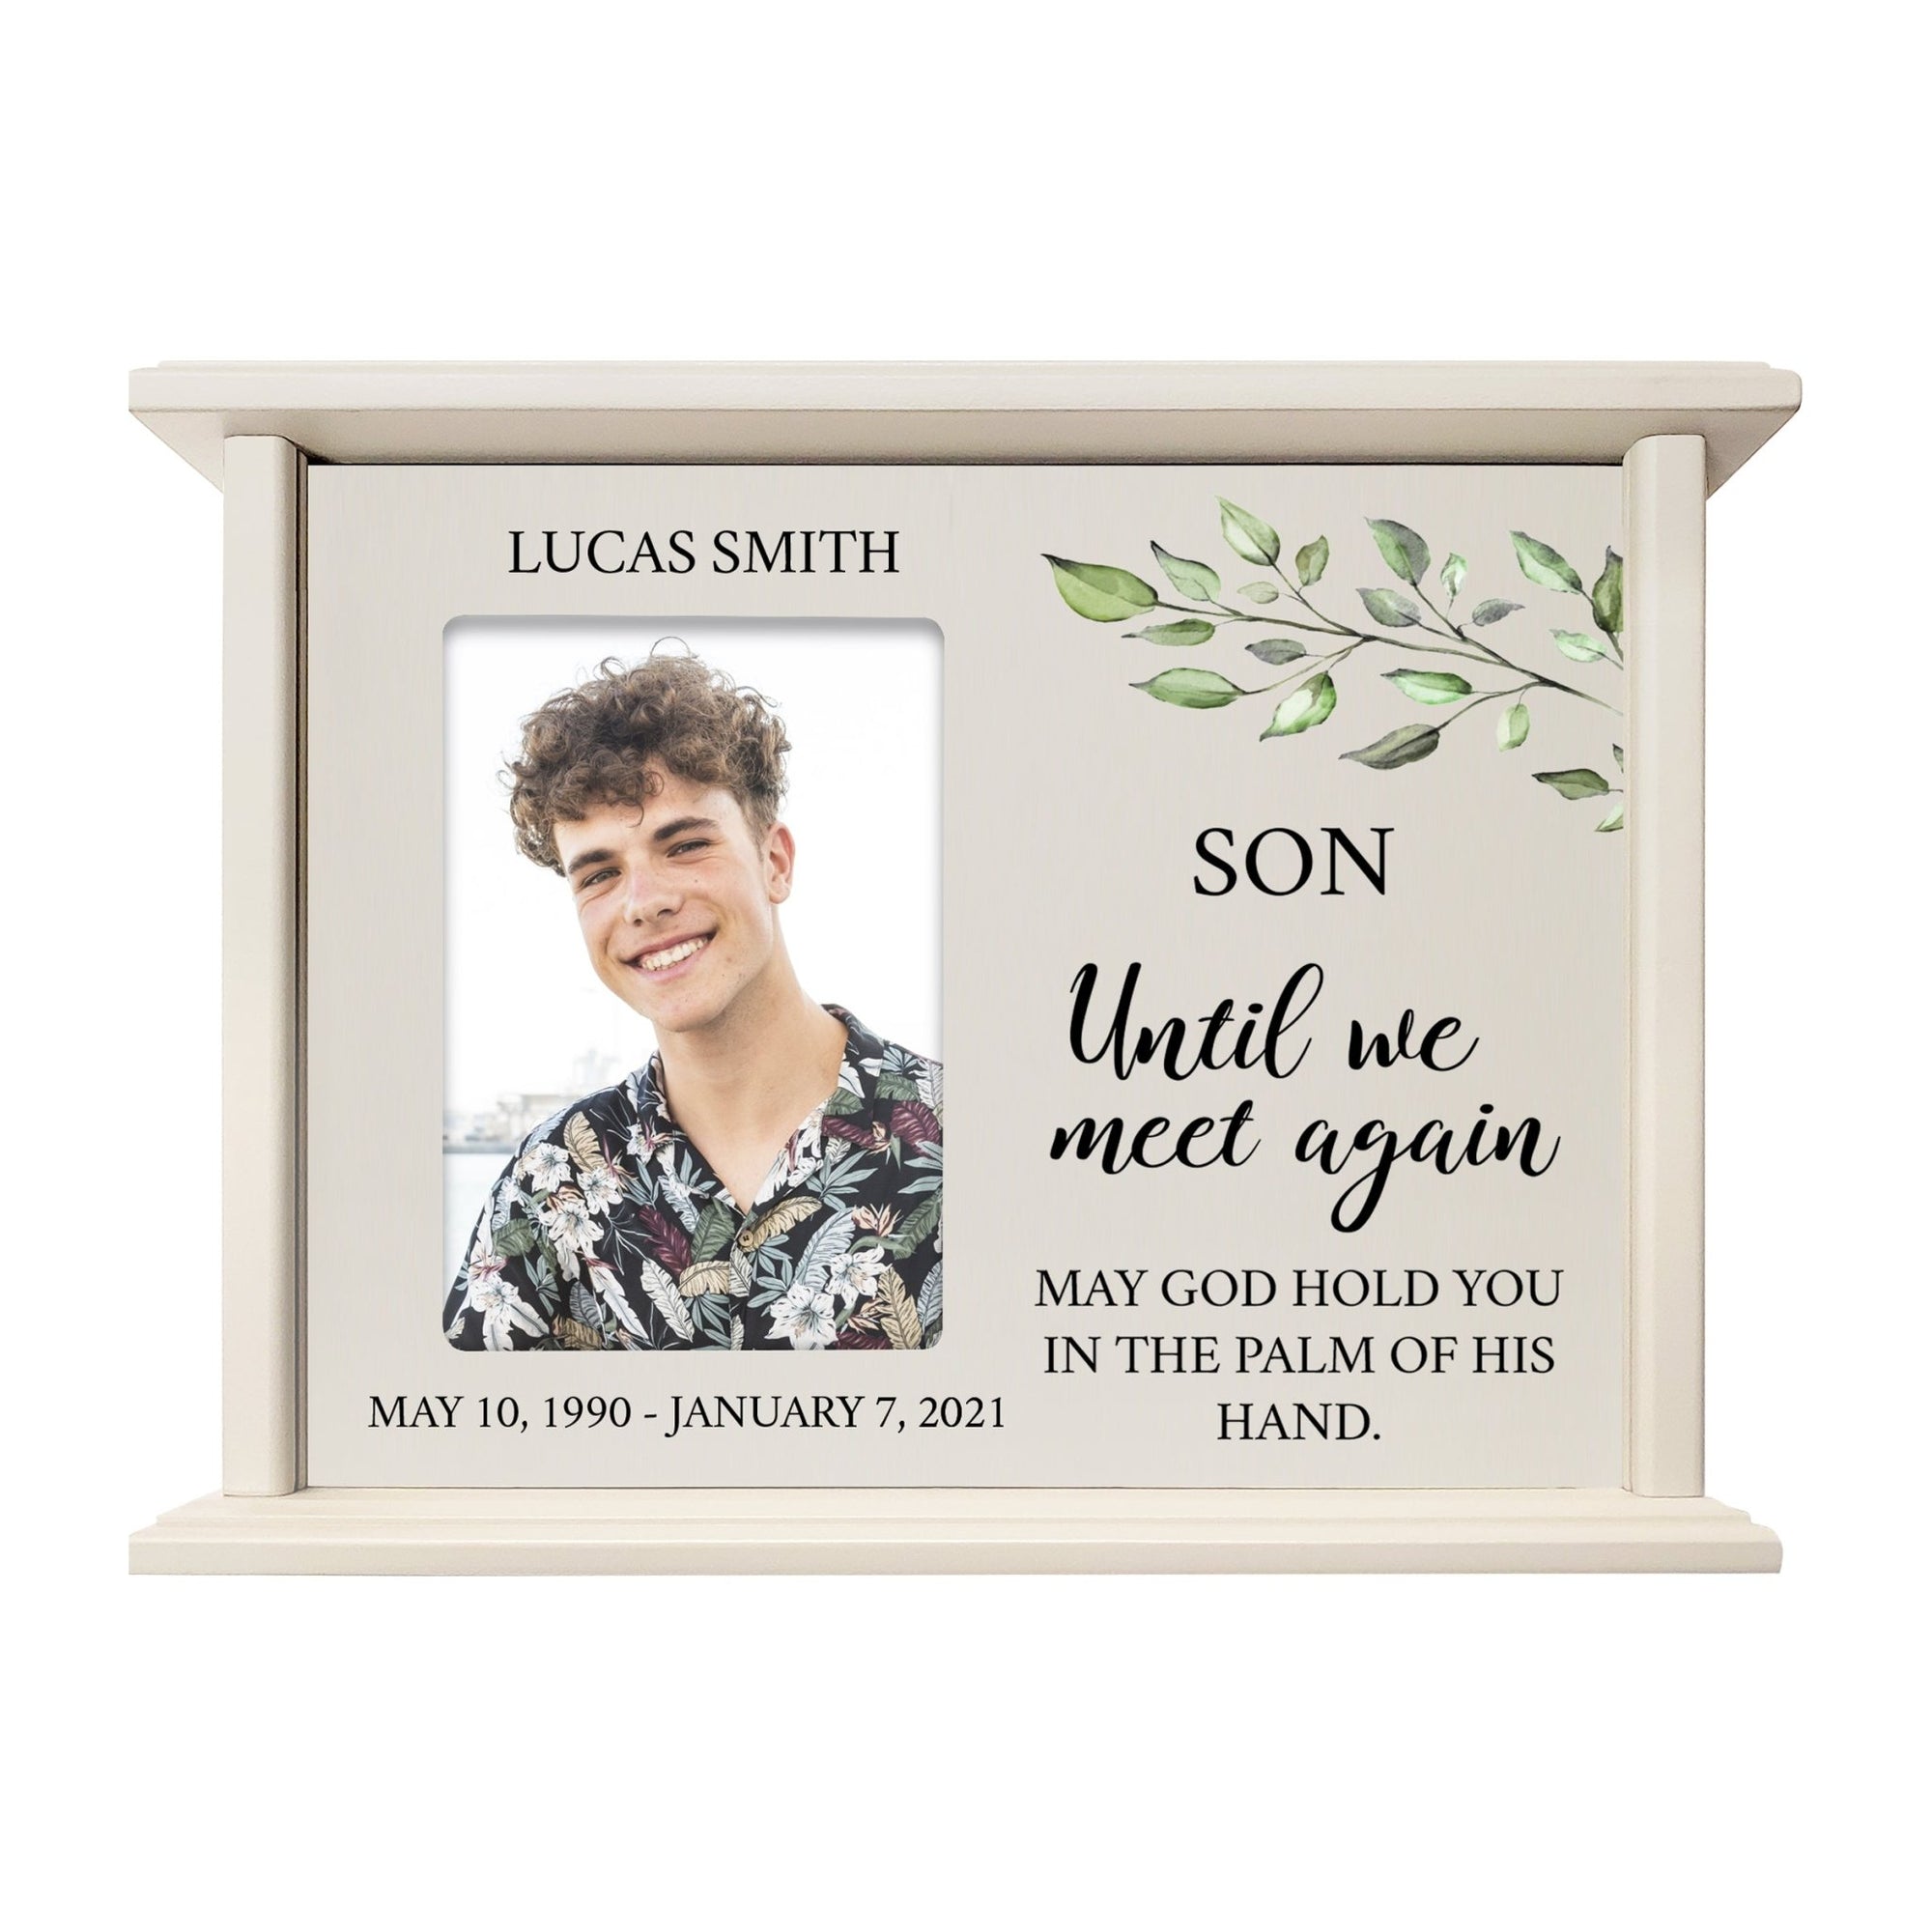 Personalized Memorial Cherry Wood 12 x 4.5 x 9 Cremation Urn Box with Picture Frame holds 200 cu in of Human Ashes and 4x6 Photo - Until We Meet Again (Ivory) - LifeSong Milestones